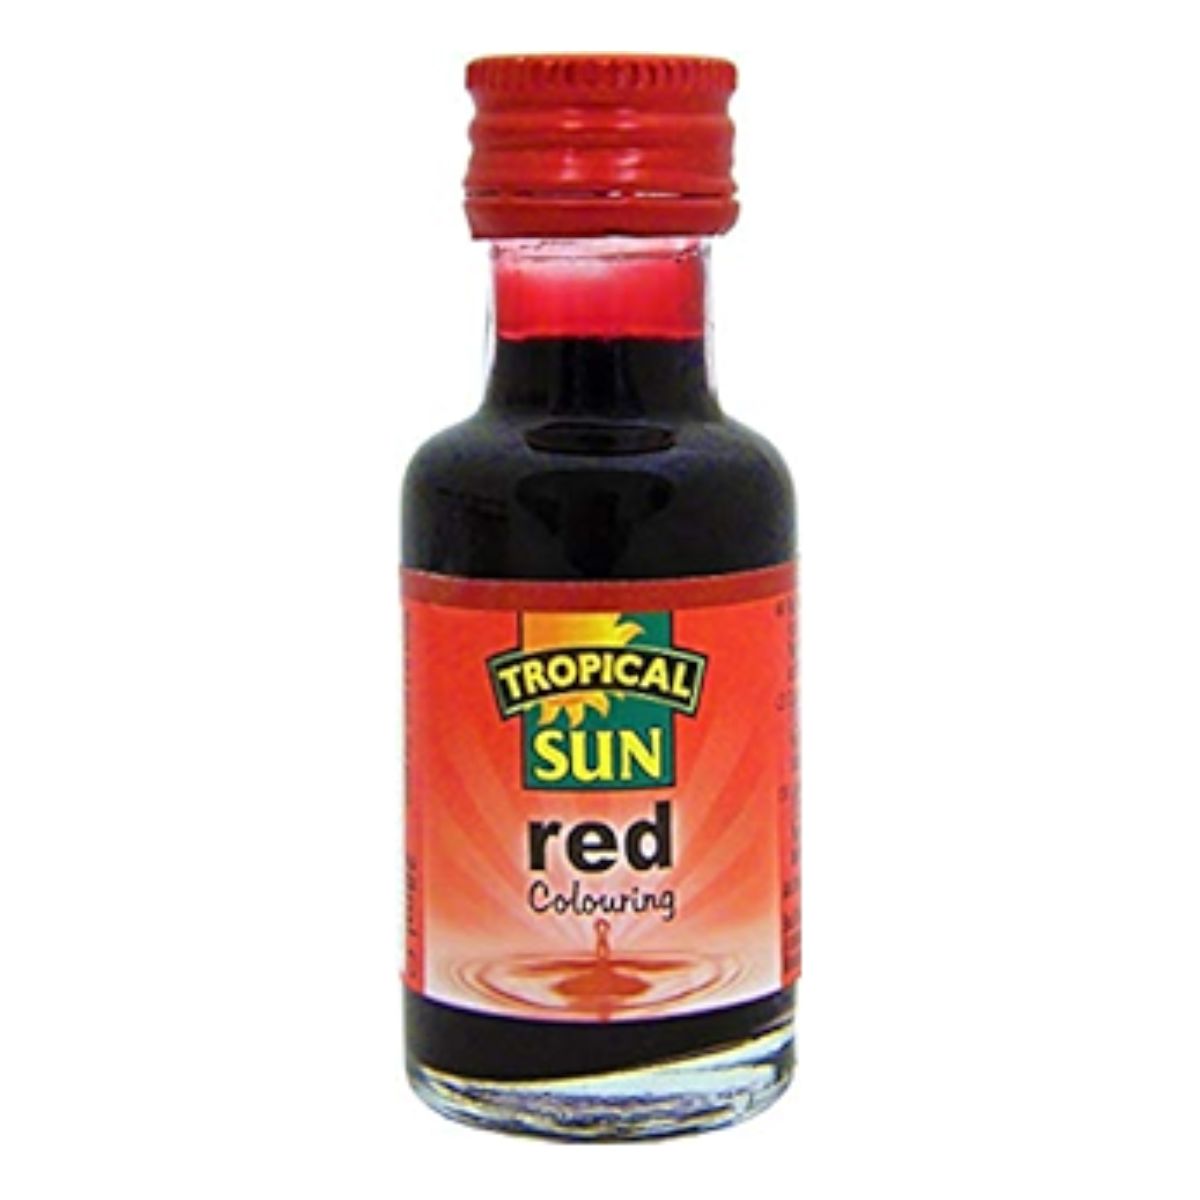 A bottle of Tropical Sun - Red Food Colouring Liquid - 28ml.